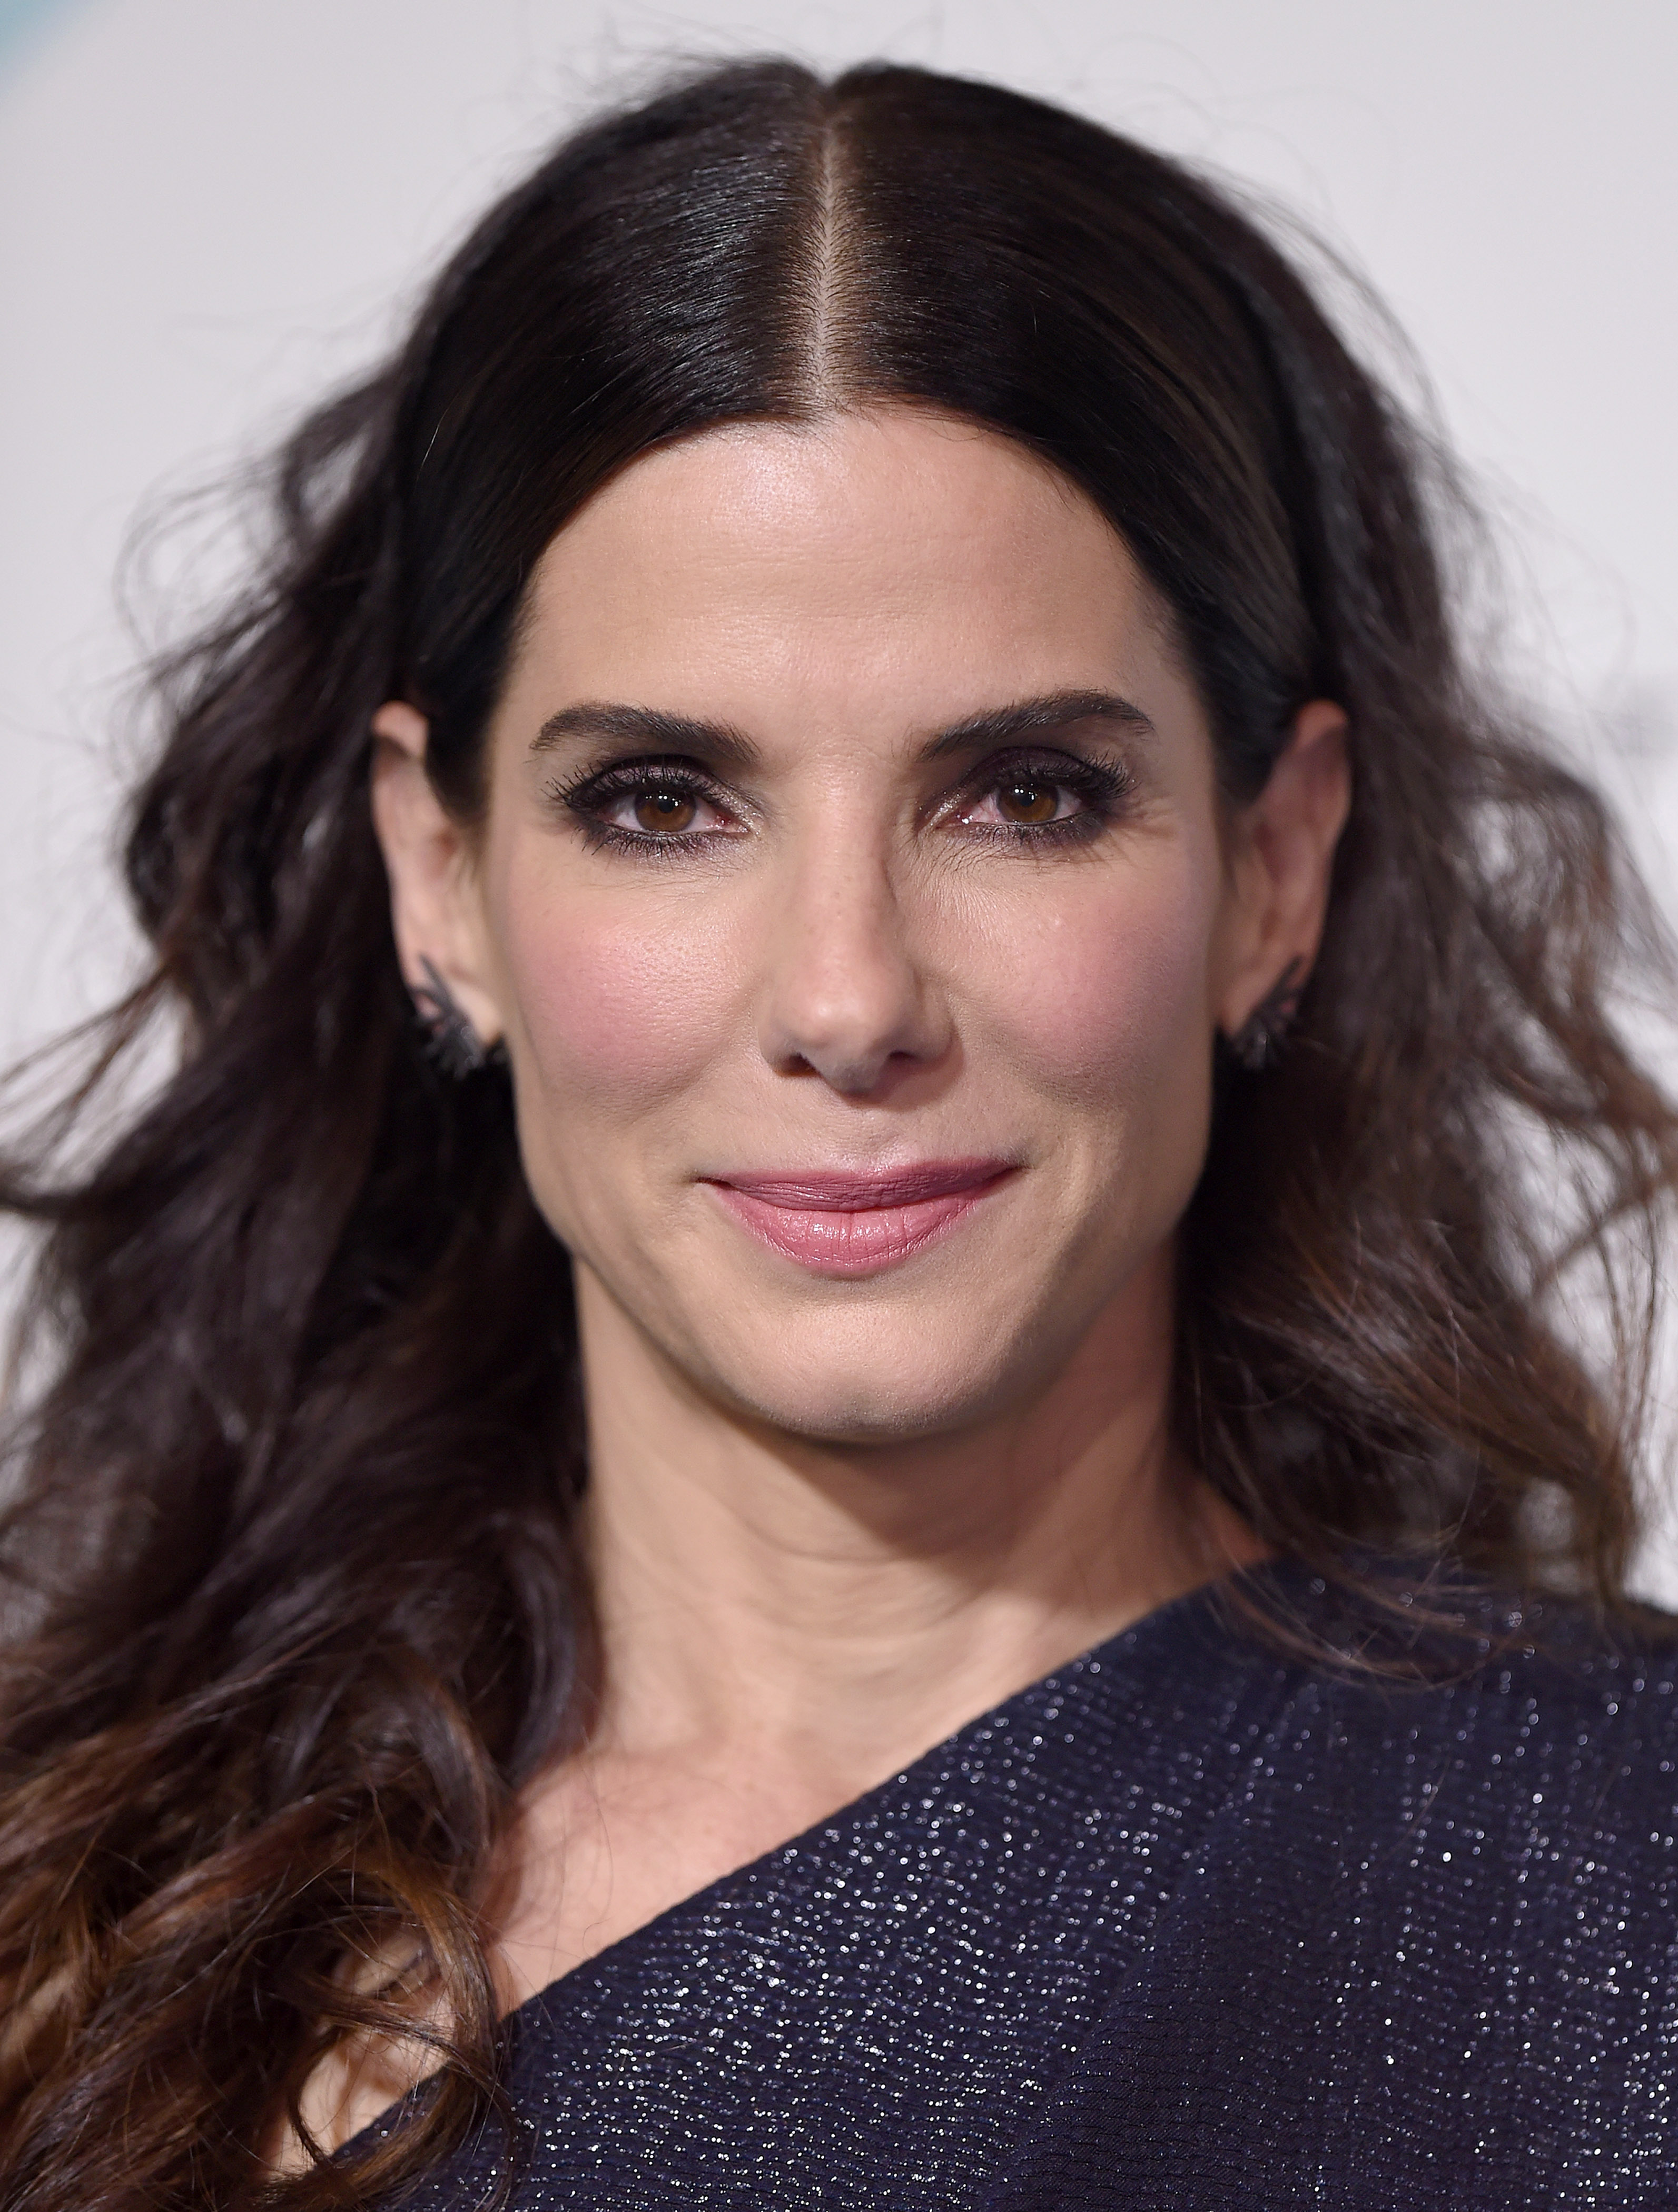 Sandra Bullock at the Women In Film 2015 Crystal + Lucy Awards at the Hyatt Regency Century Plaza on June 16, 2015 in Los Angeles, California | Source: Getty Images